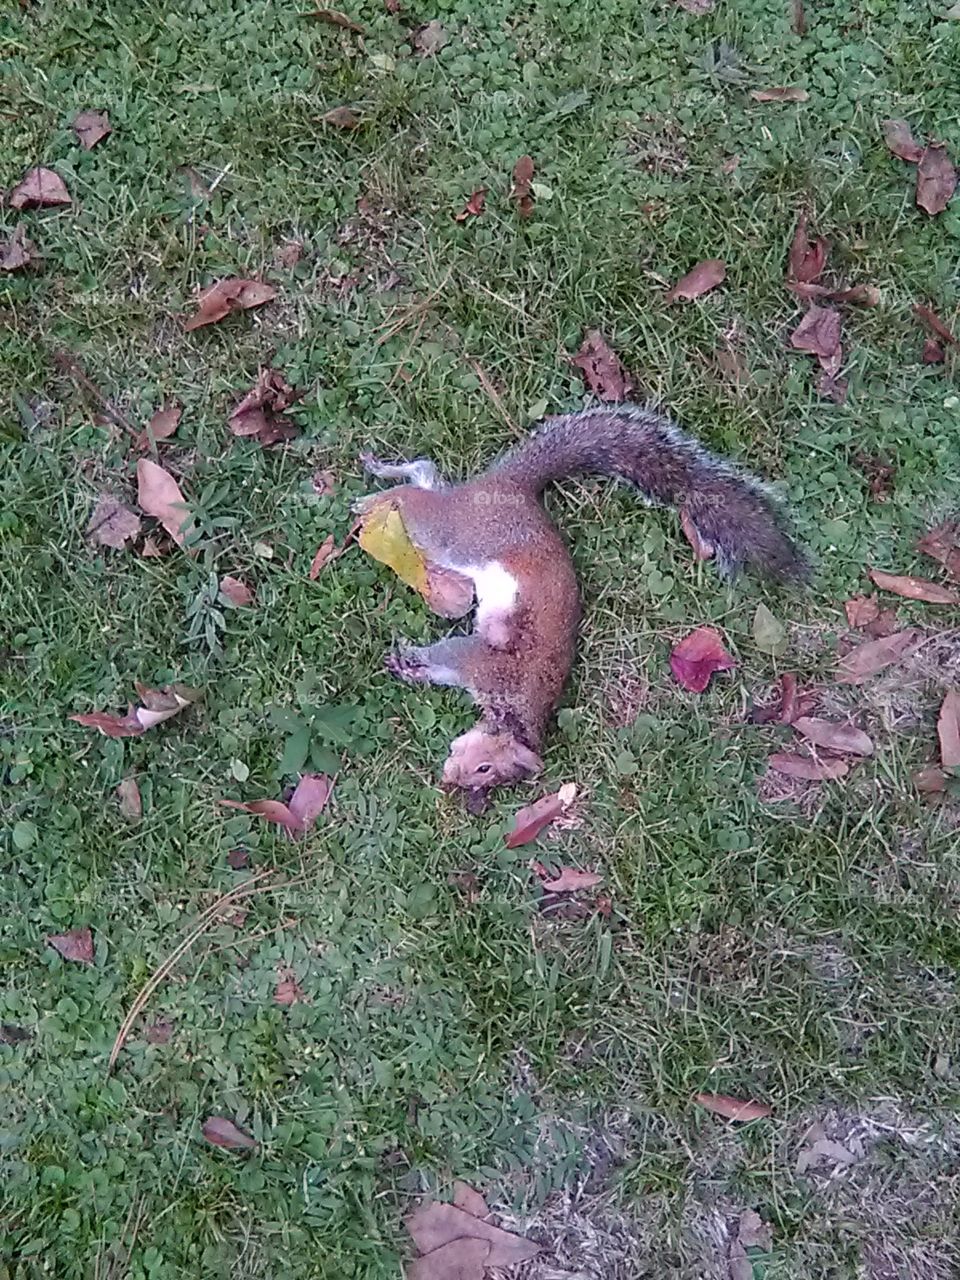 Squirrel got caught by cats